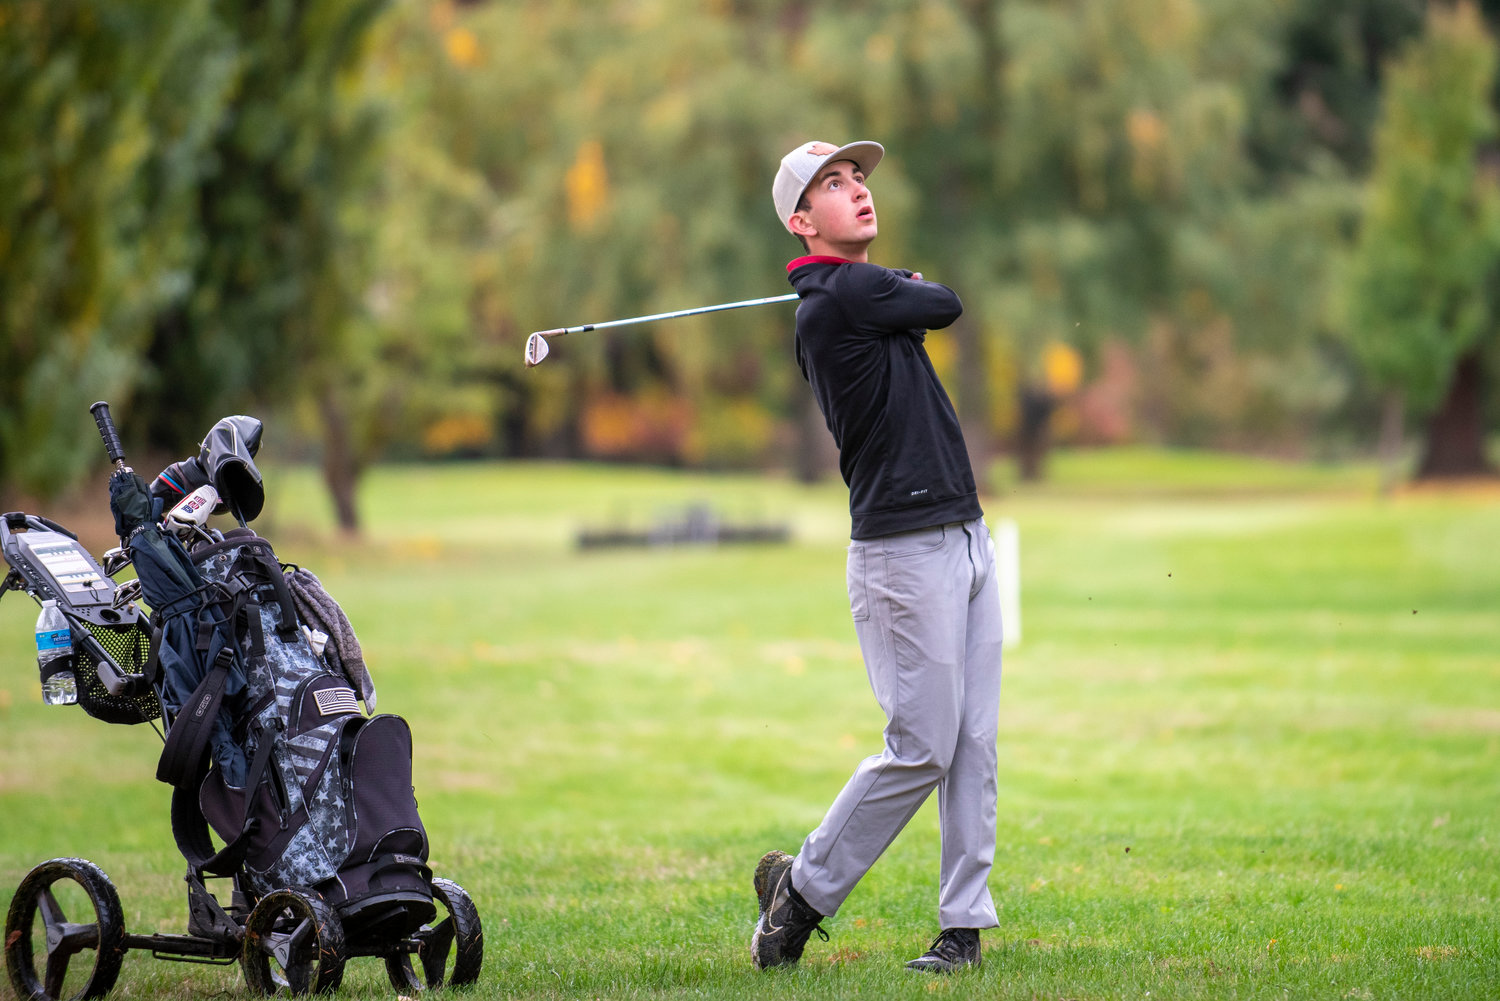 W.F. West's Brock Bunker hits a shot toward the 17th hole during the 2A Evergreen Conference championships at Riverside Golf Course on Oct. 18, 2021.